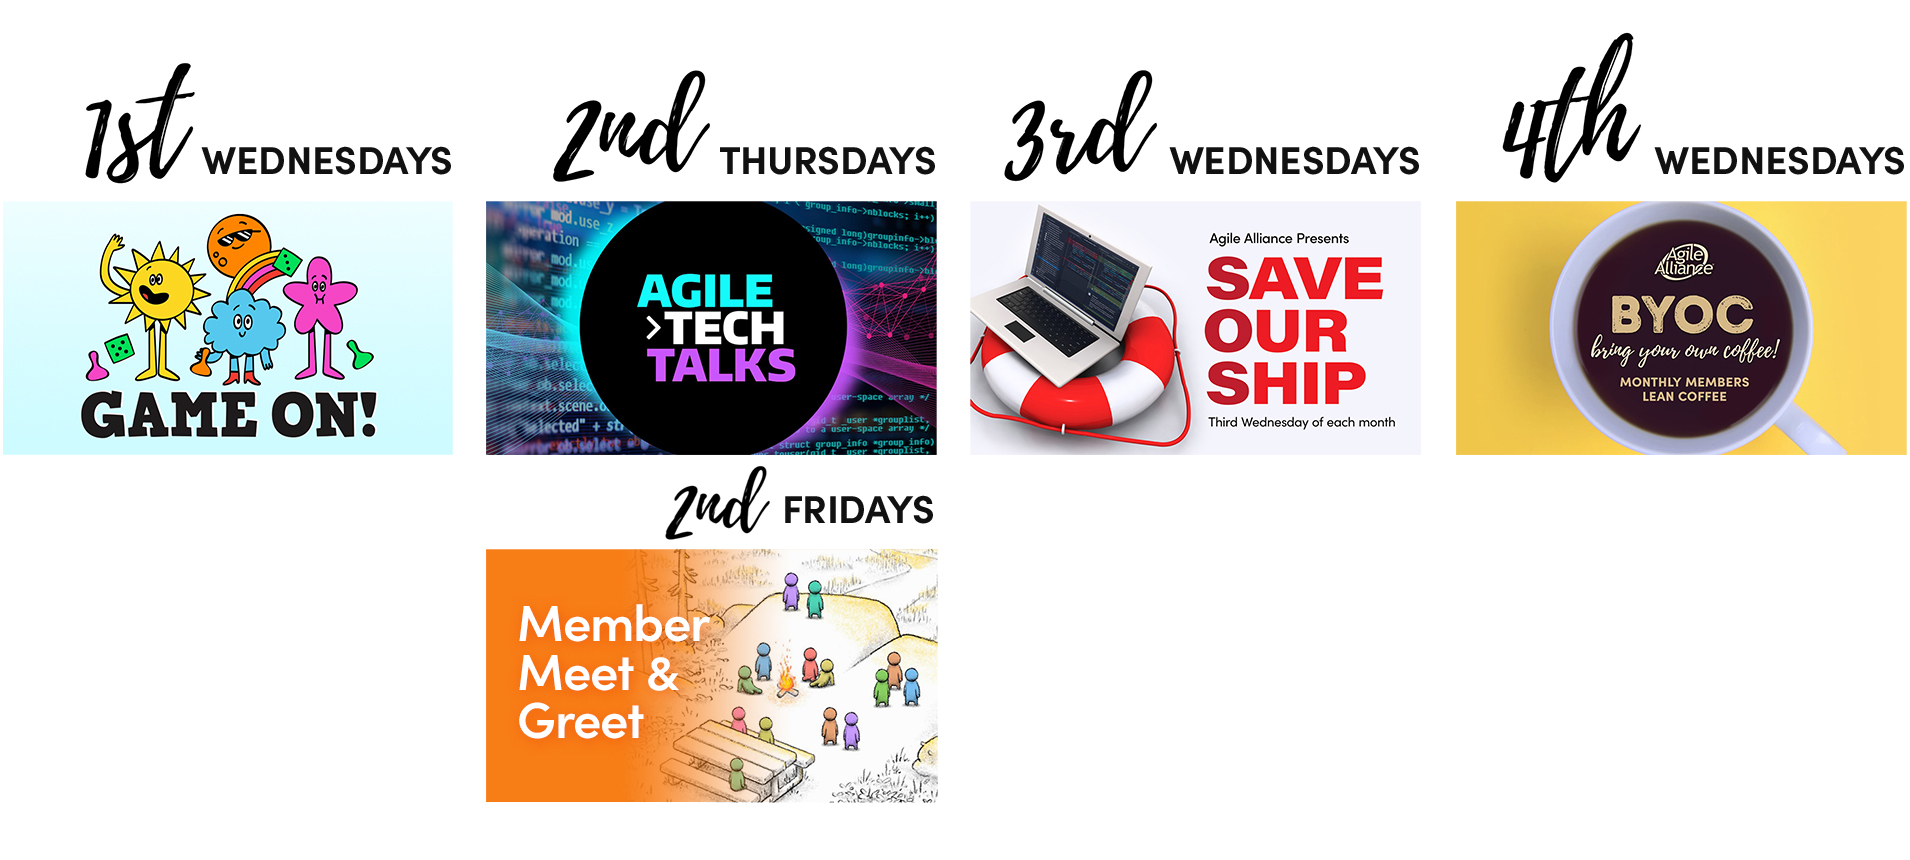 Agile Alliance Monthly Member Events